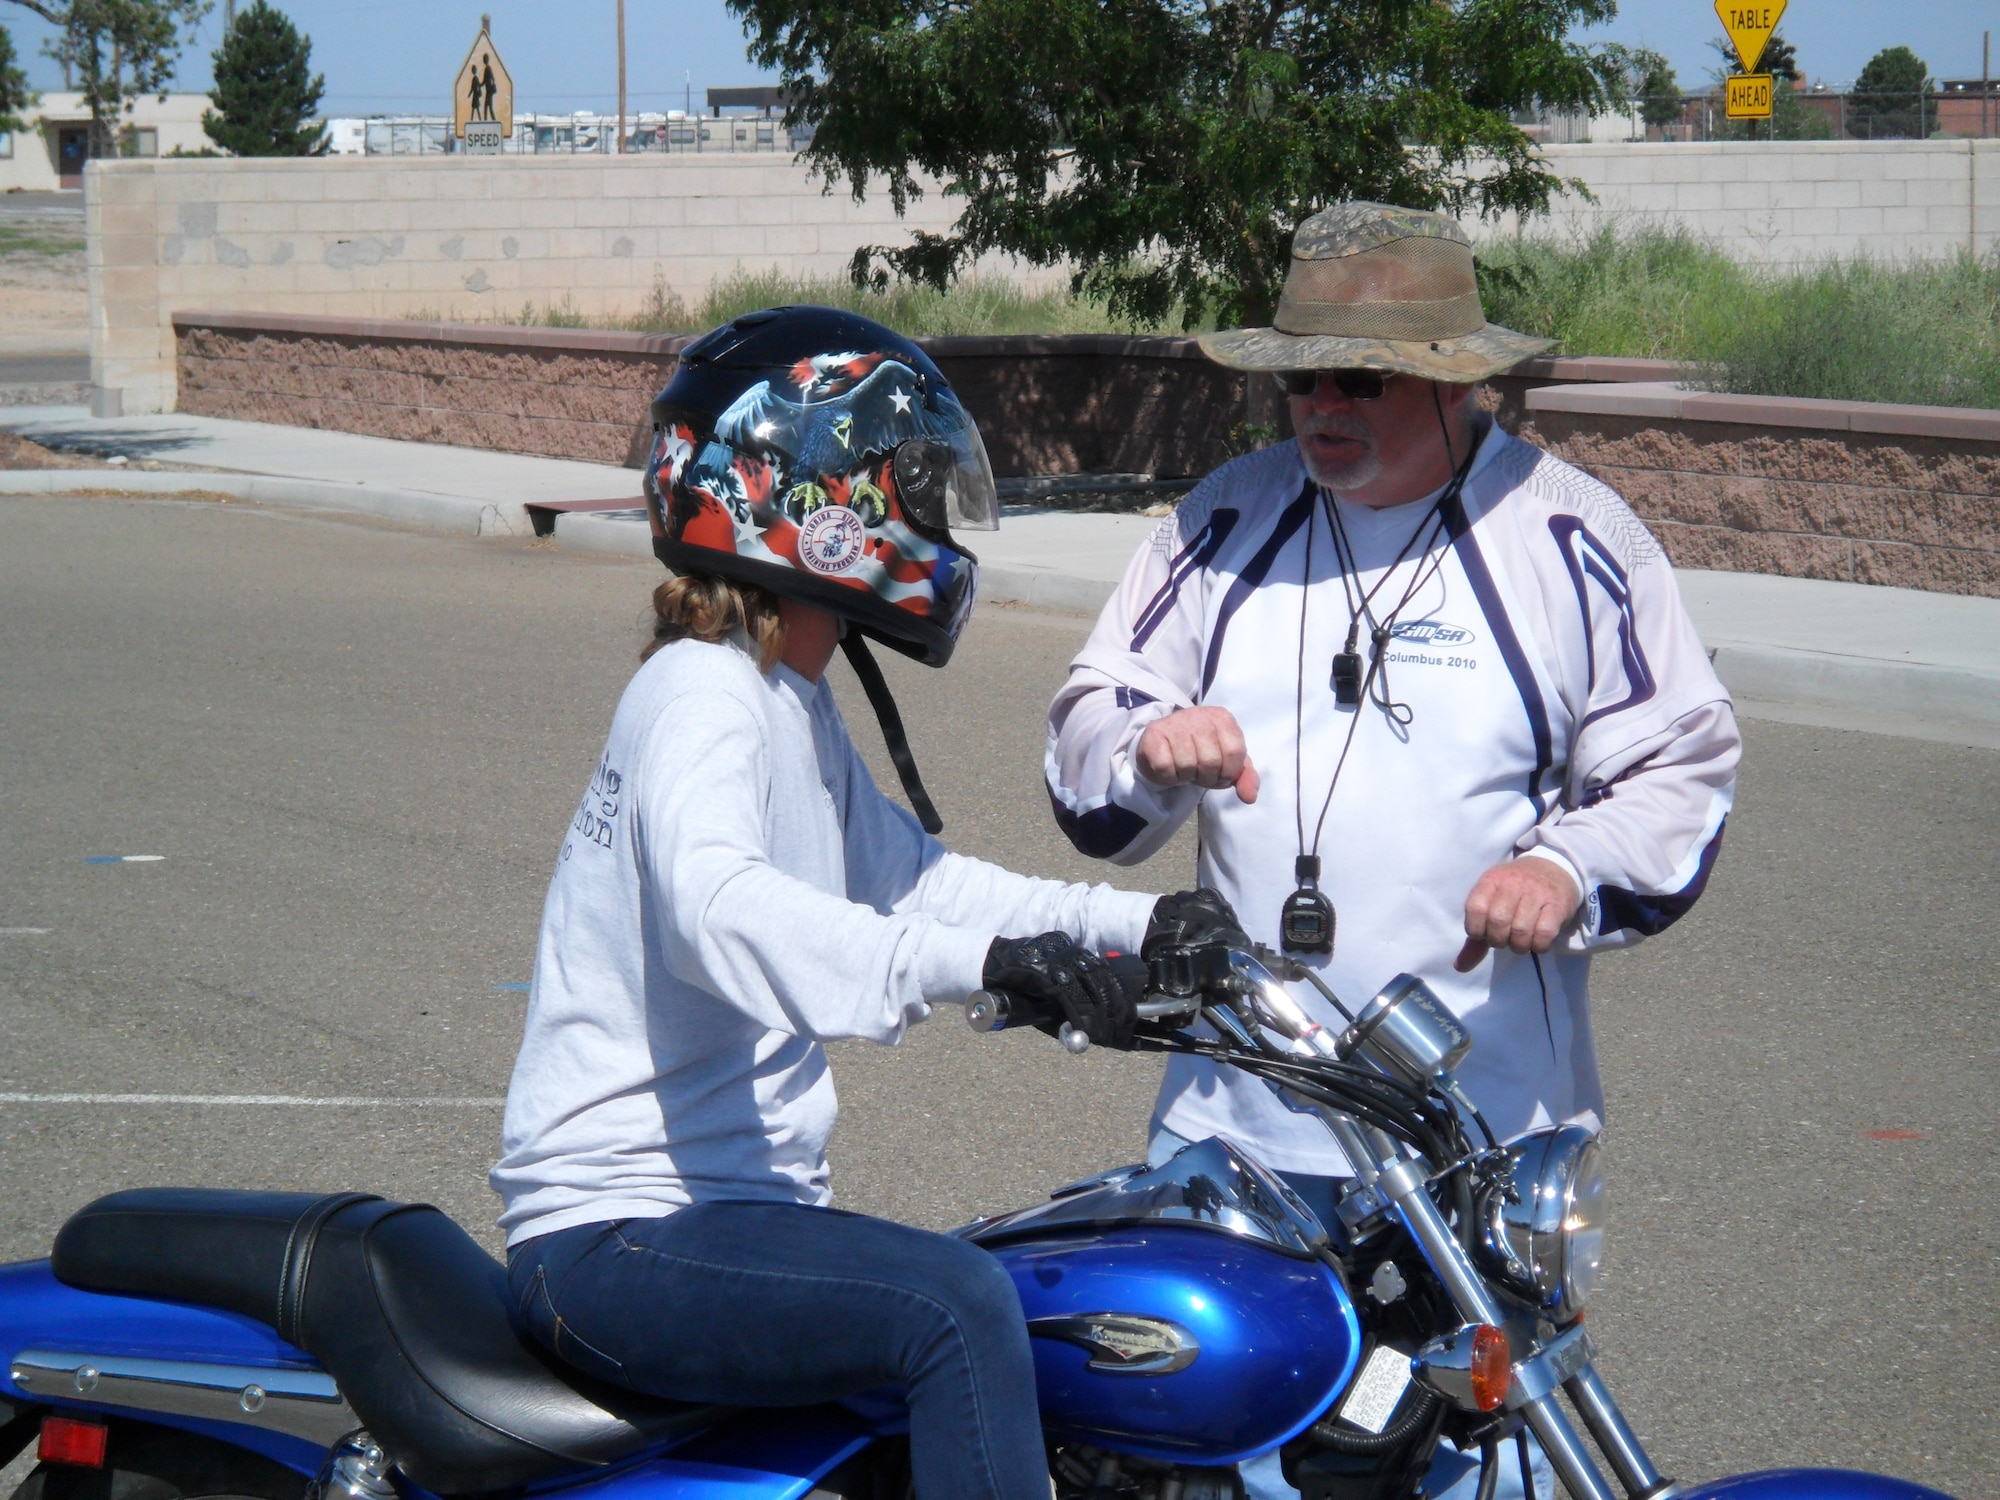 Arthur Albert, motorcycle safety program coordinator and MSF instructor, instructs a student in proper riding technique in a recent MSF Basic Rider Course at Kirtland. (Photo by Steven Dobbs)
